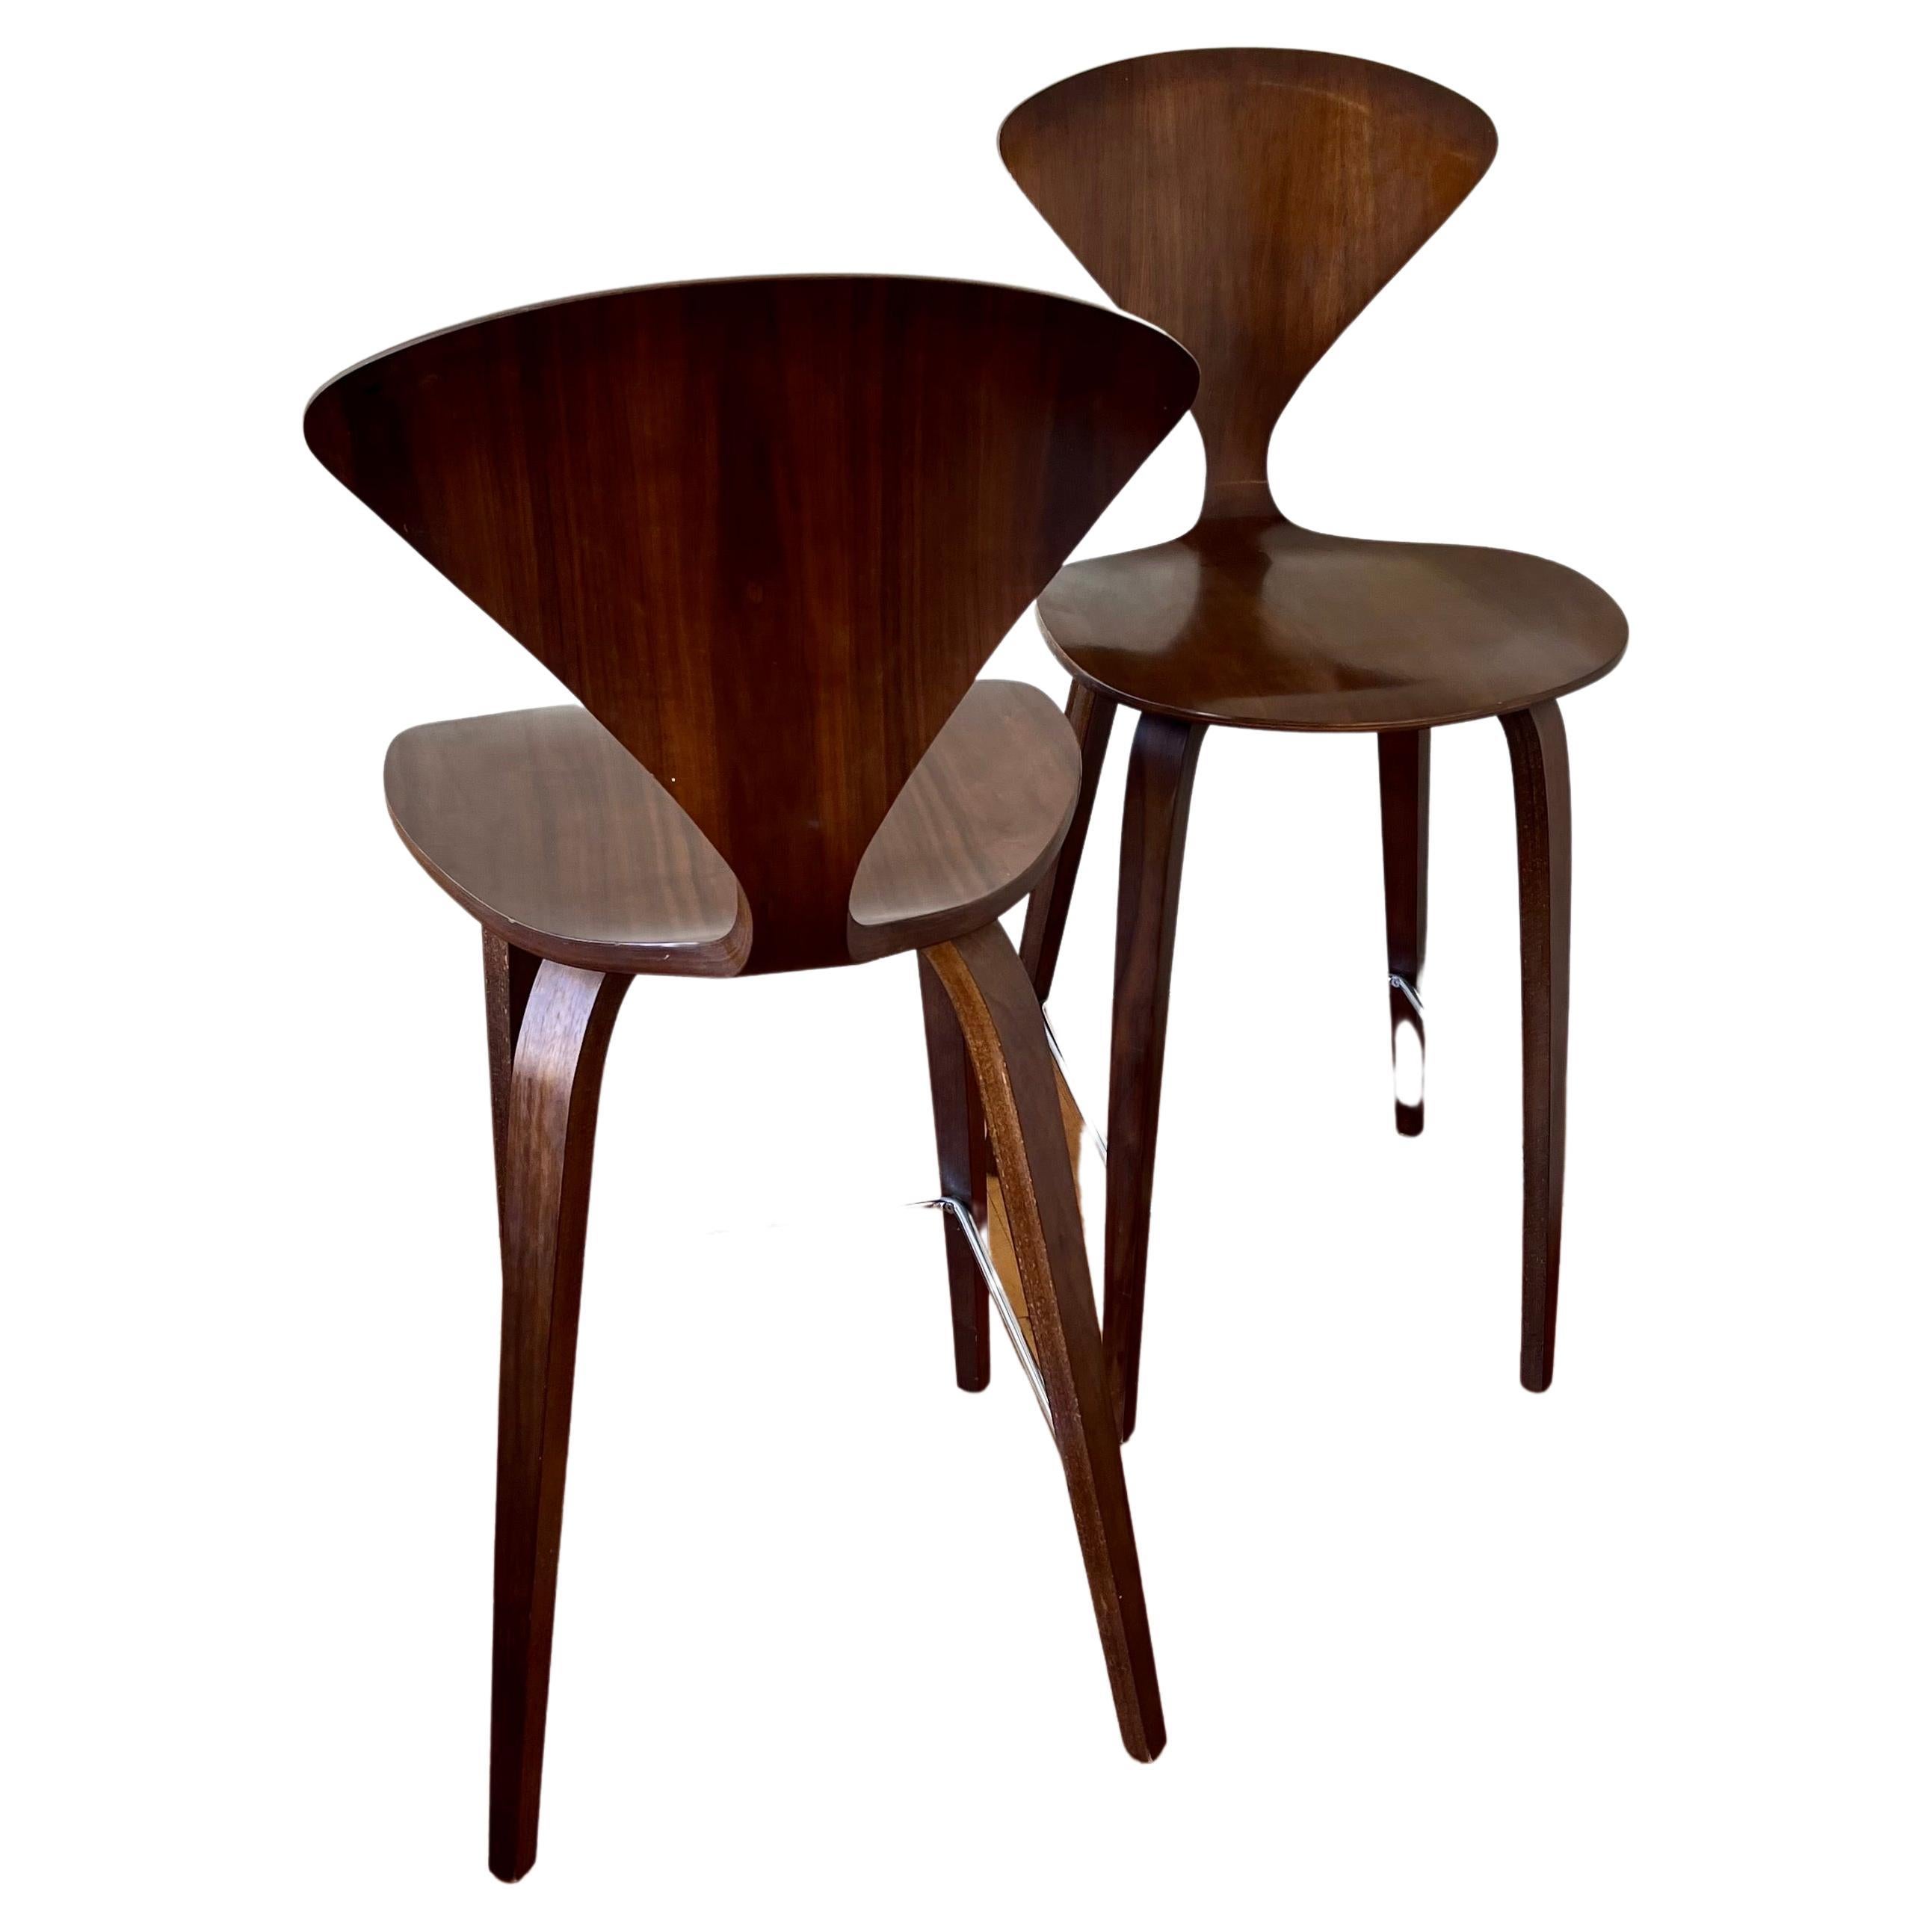 Great design on these set of 2 Norman Cherner Barstools light wear 2 pairs available buyer has the choice to buy 2 or 4.